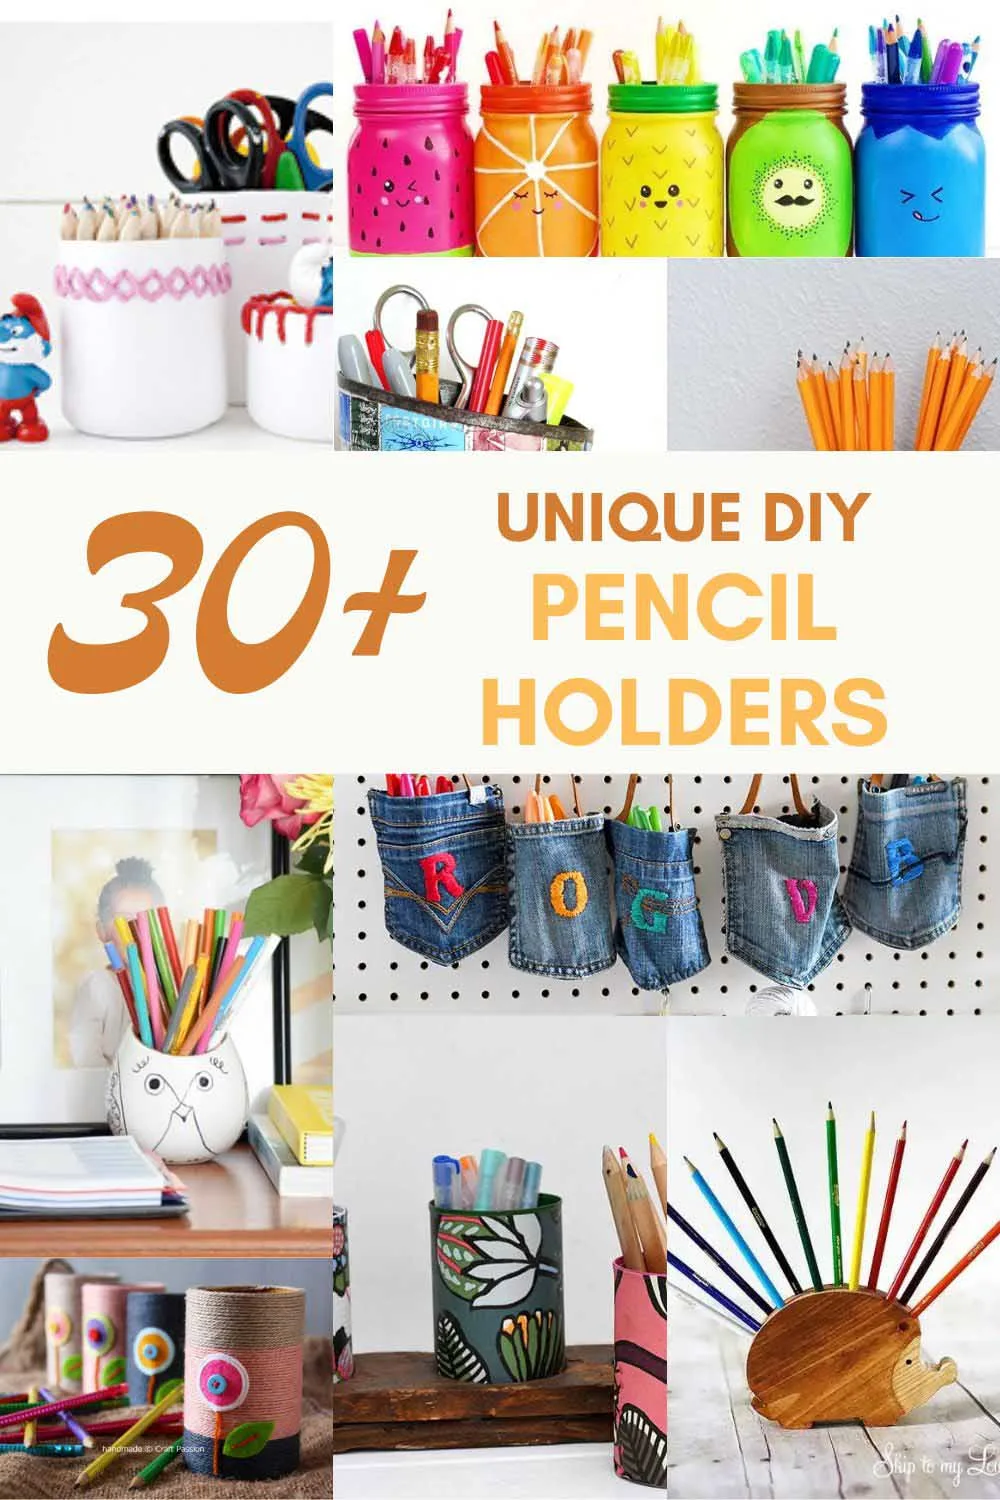 Pen Holder for Desk Cute - Ceramic Pencil Holder for Cool Work Desk Accessories, Cute Office Supplies Gifts for Women and Men, Pen Pencil Cup